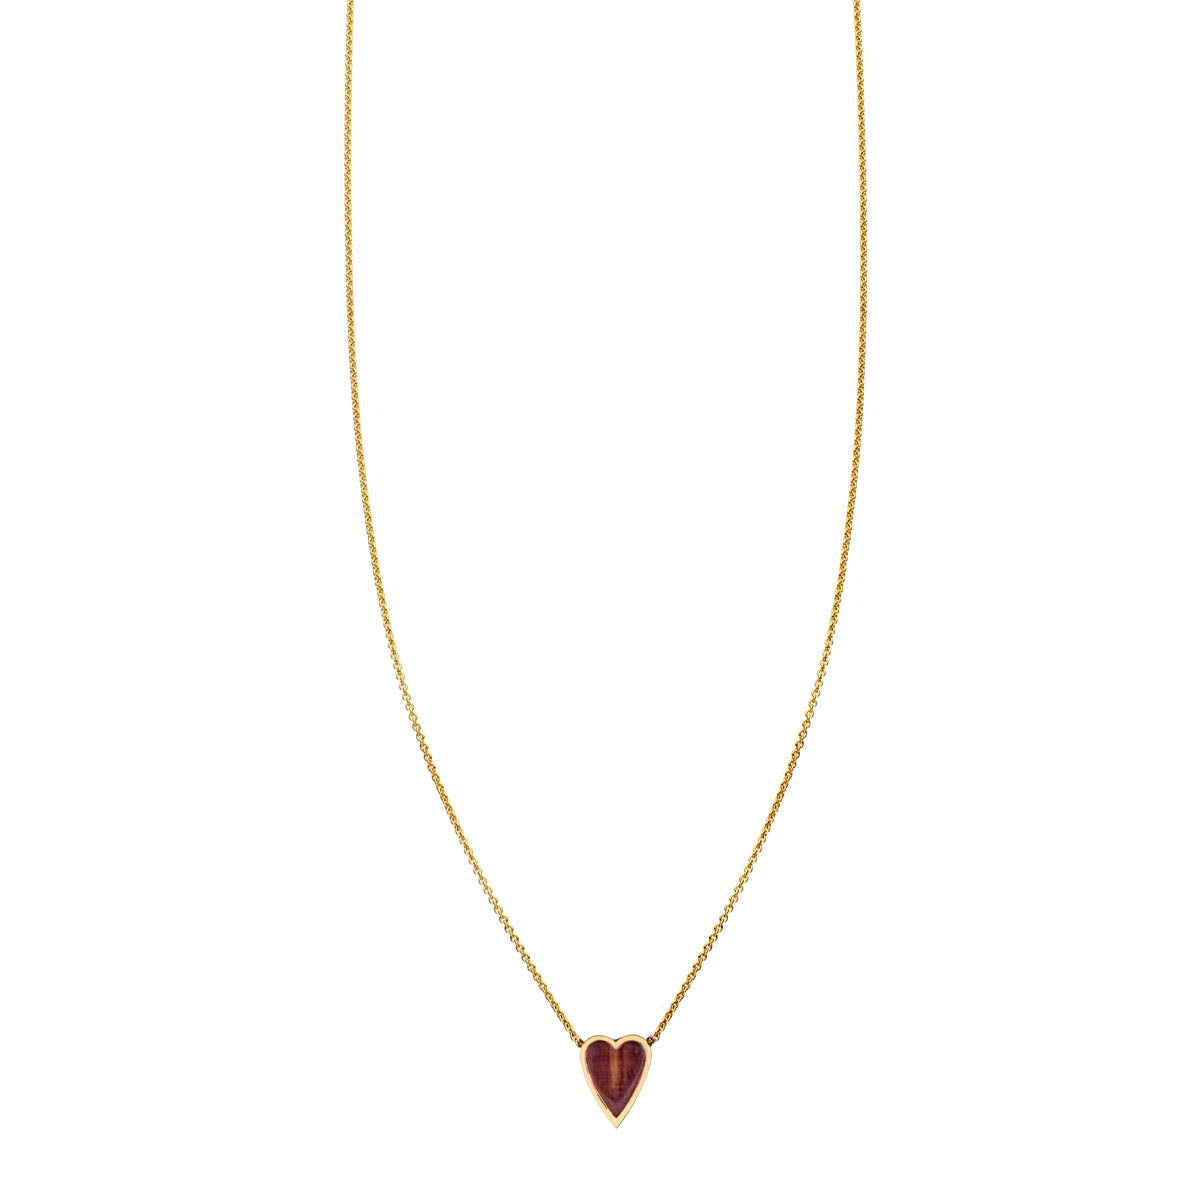 Charming long-link necklace with Heart | Nomination